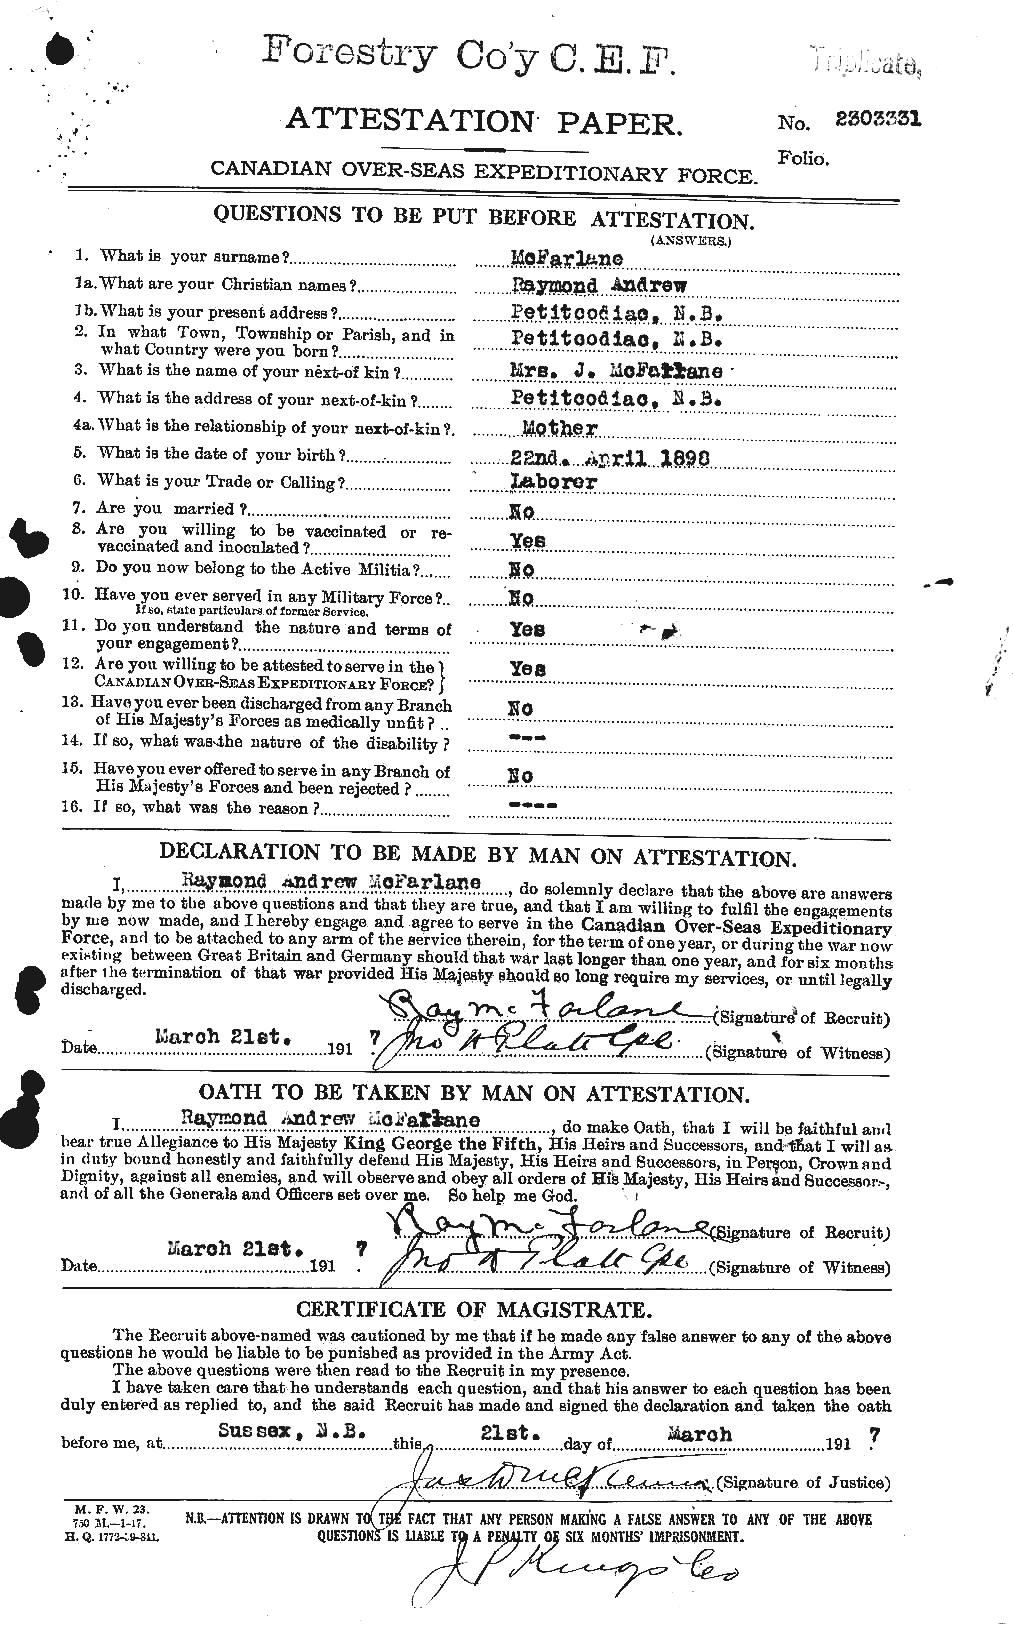 Personnel Records of the First World War - CEF 522751a